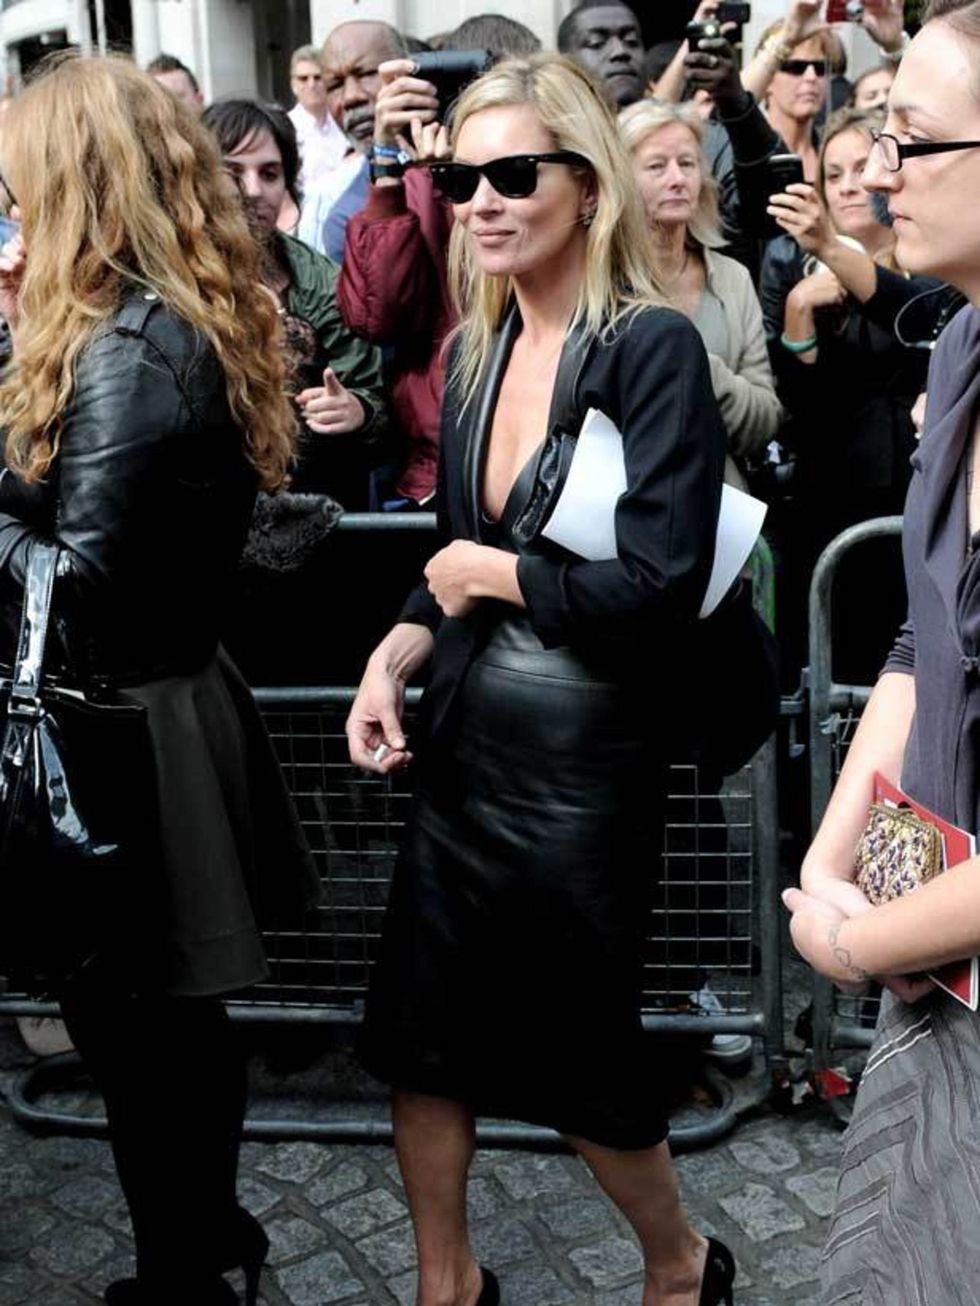 <p><a href="http://www.elleuk.com/starstyle/style-files/%28section%29/Kate-Moss">Kate Moss</a> wearing a leather skirt during <a href="http://www.elleuk.com/fashion/street-style/%28section%29/the-way-you-wear-it-london-fashion-week/%28img%29/499953">Londo